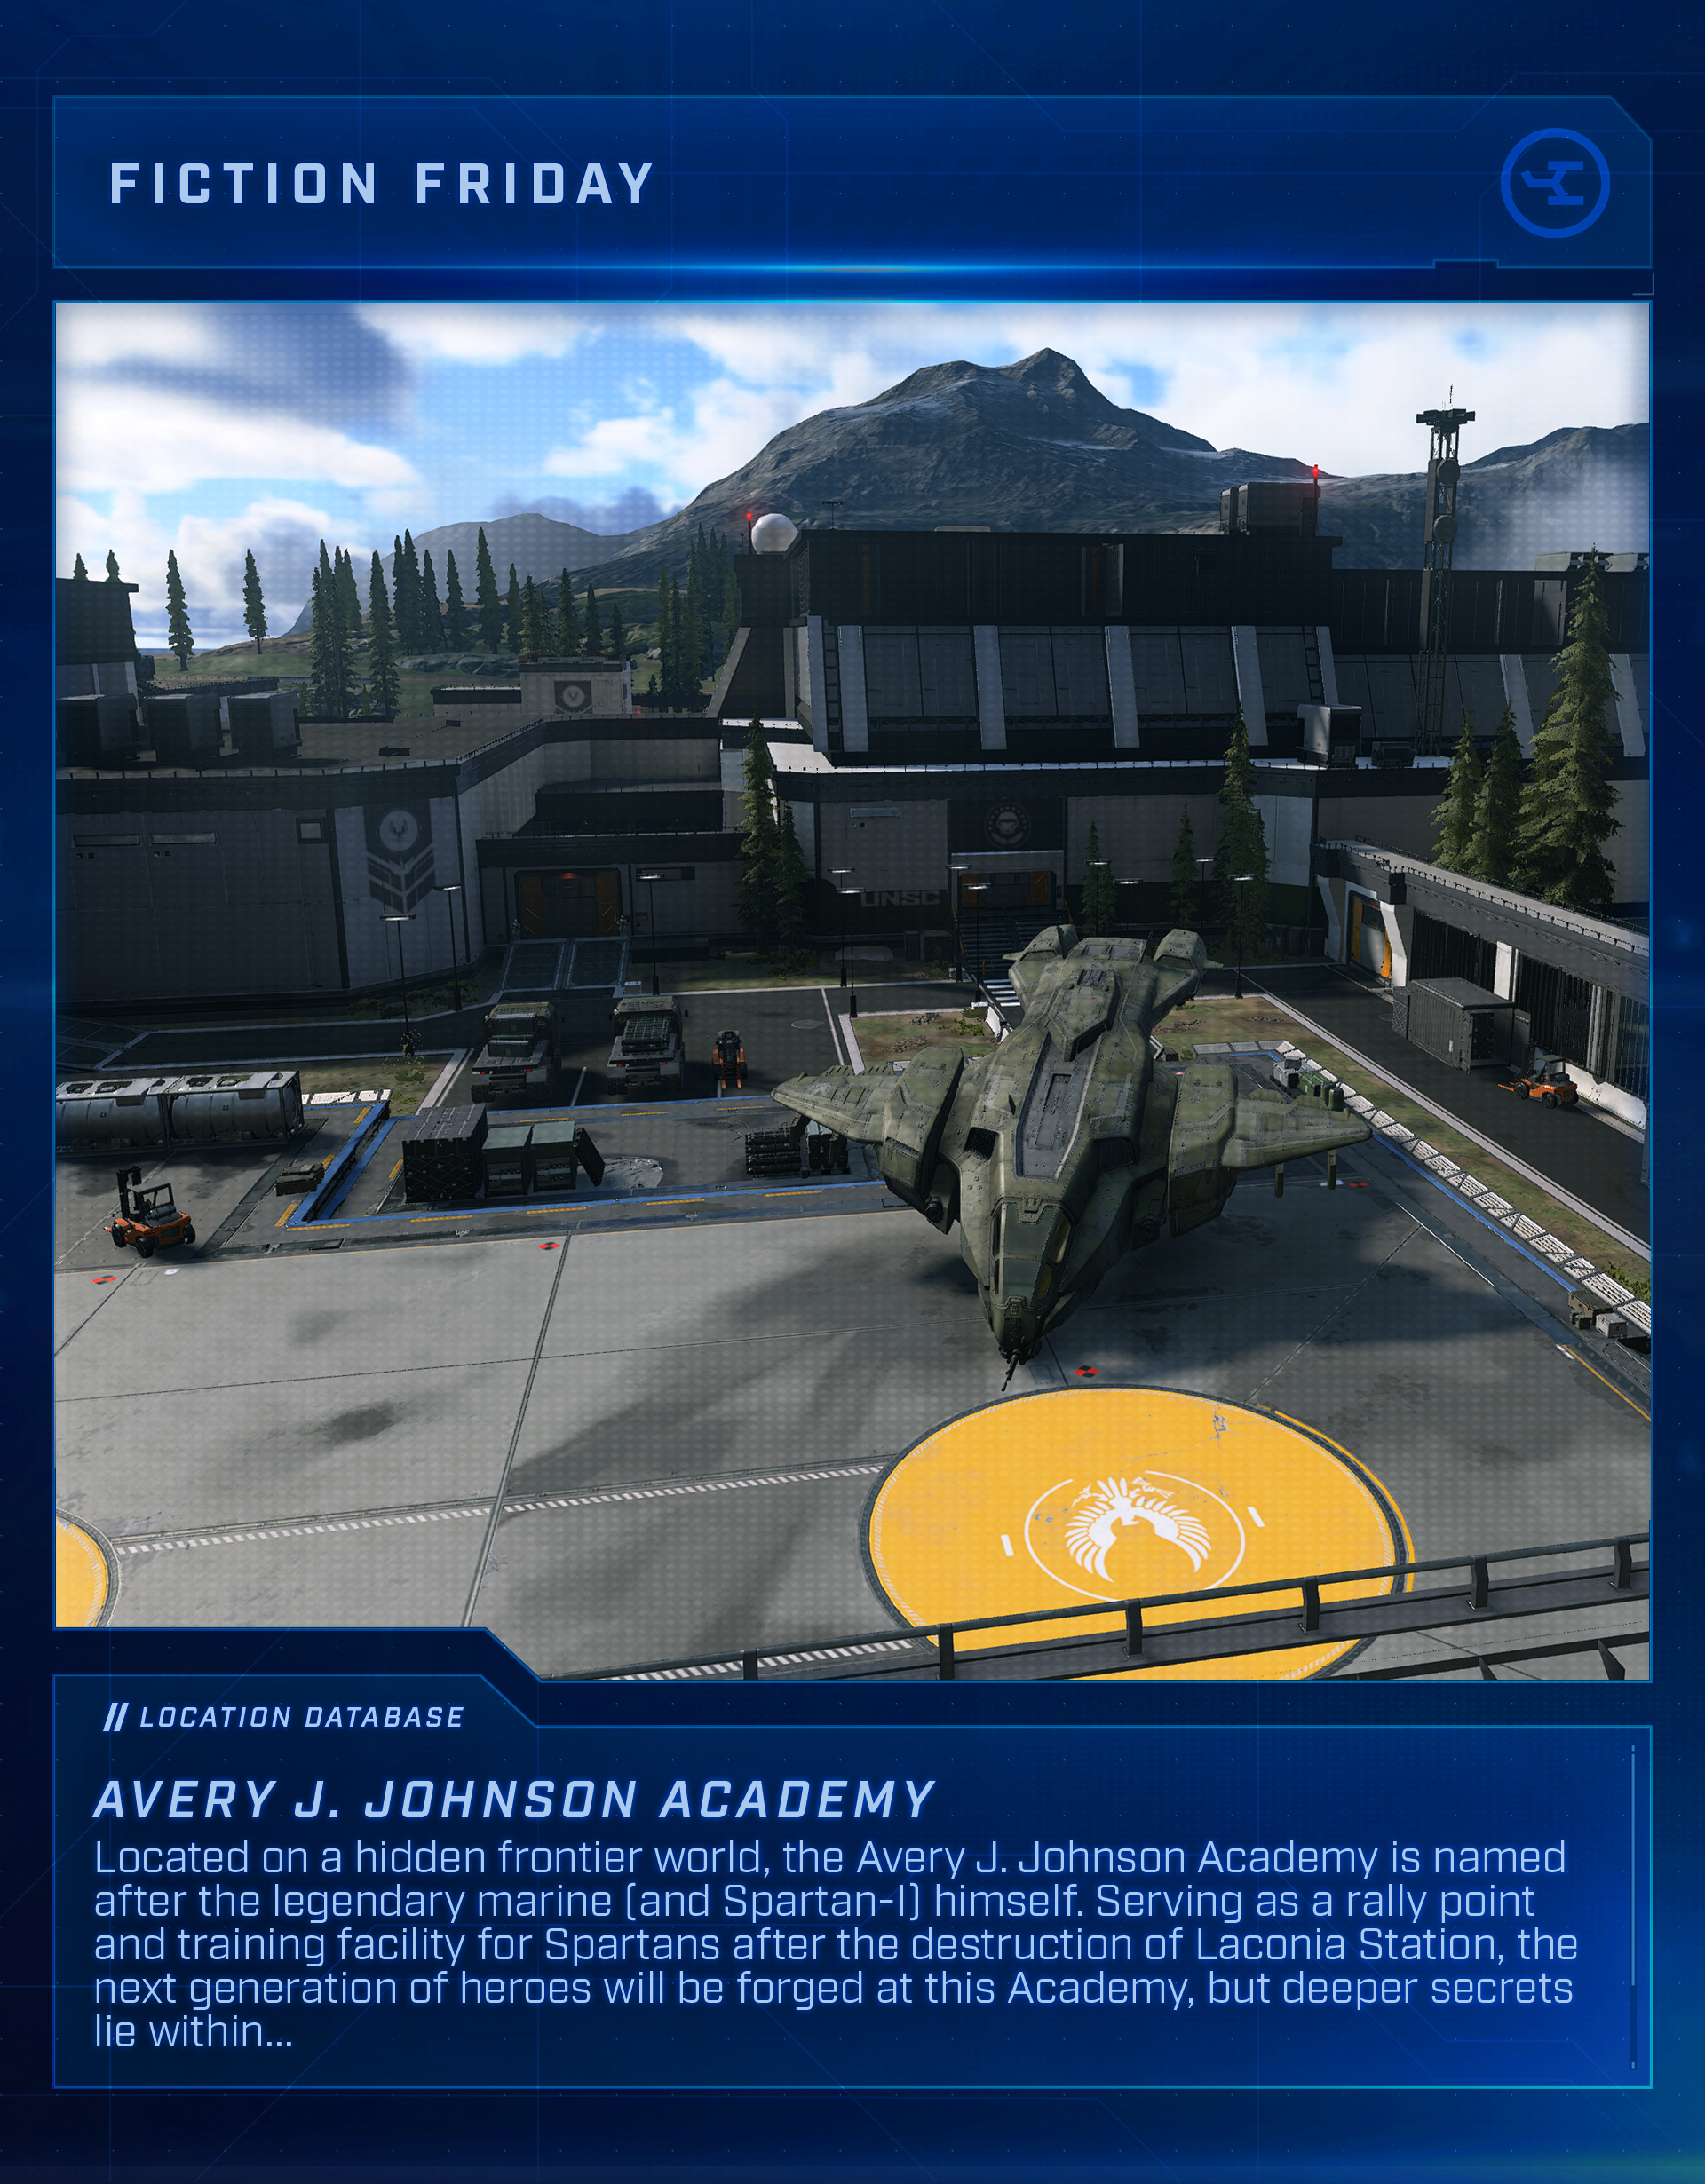 Halo on X: 👥 CHARACTER DATABASE  AVERY J. JOHNSON Folks need heroes to  give 'em hope, and that's what the next generation of humanity's finest are  trained to become under the